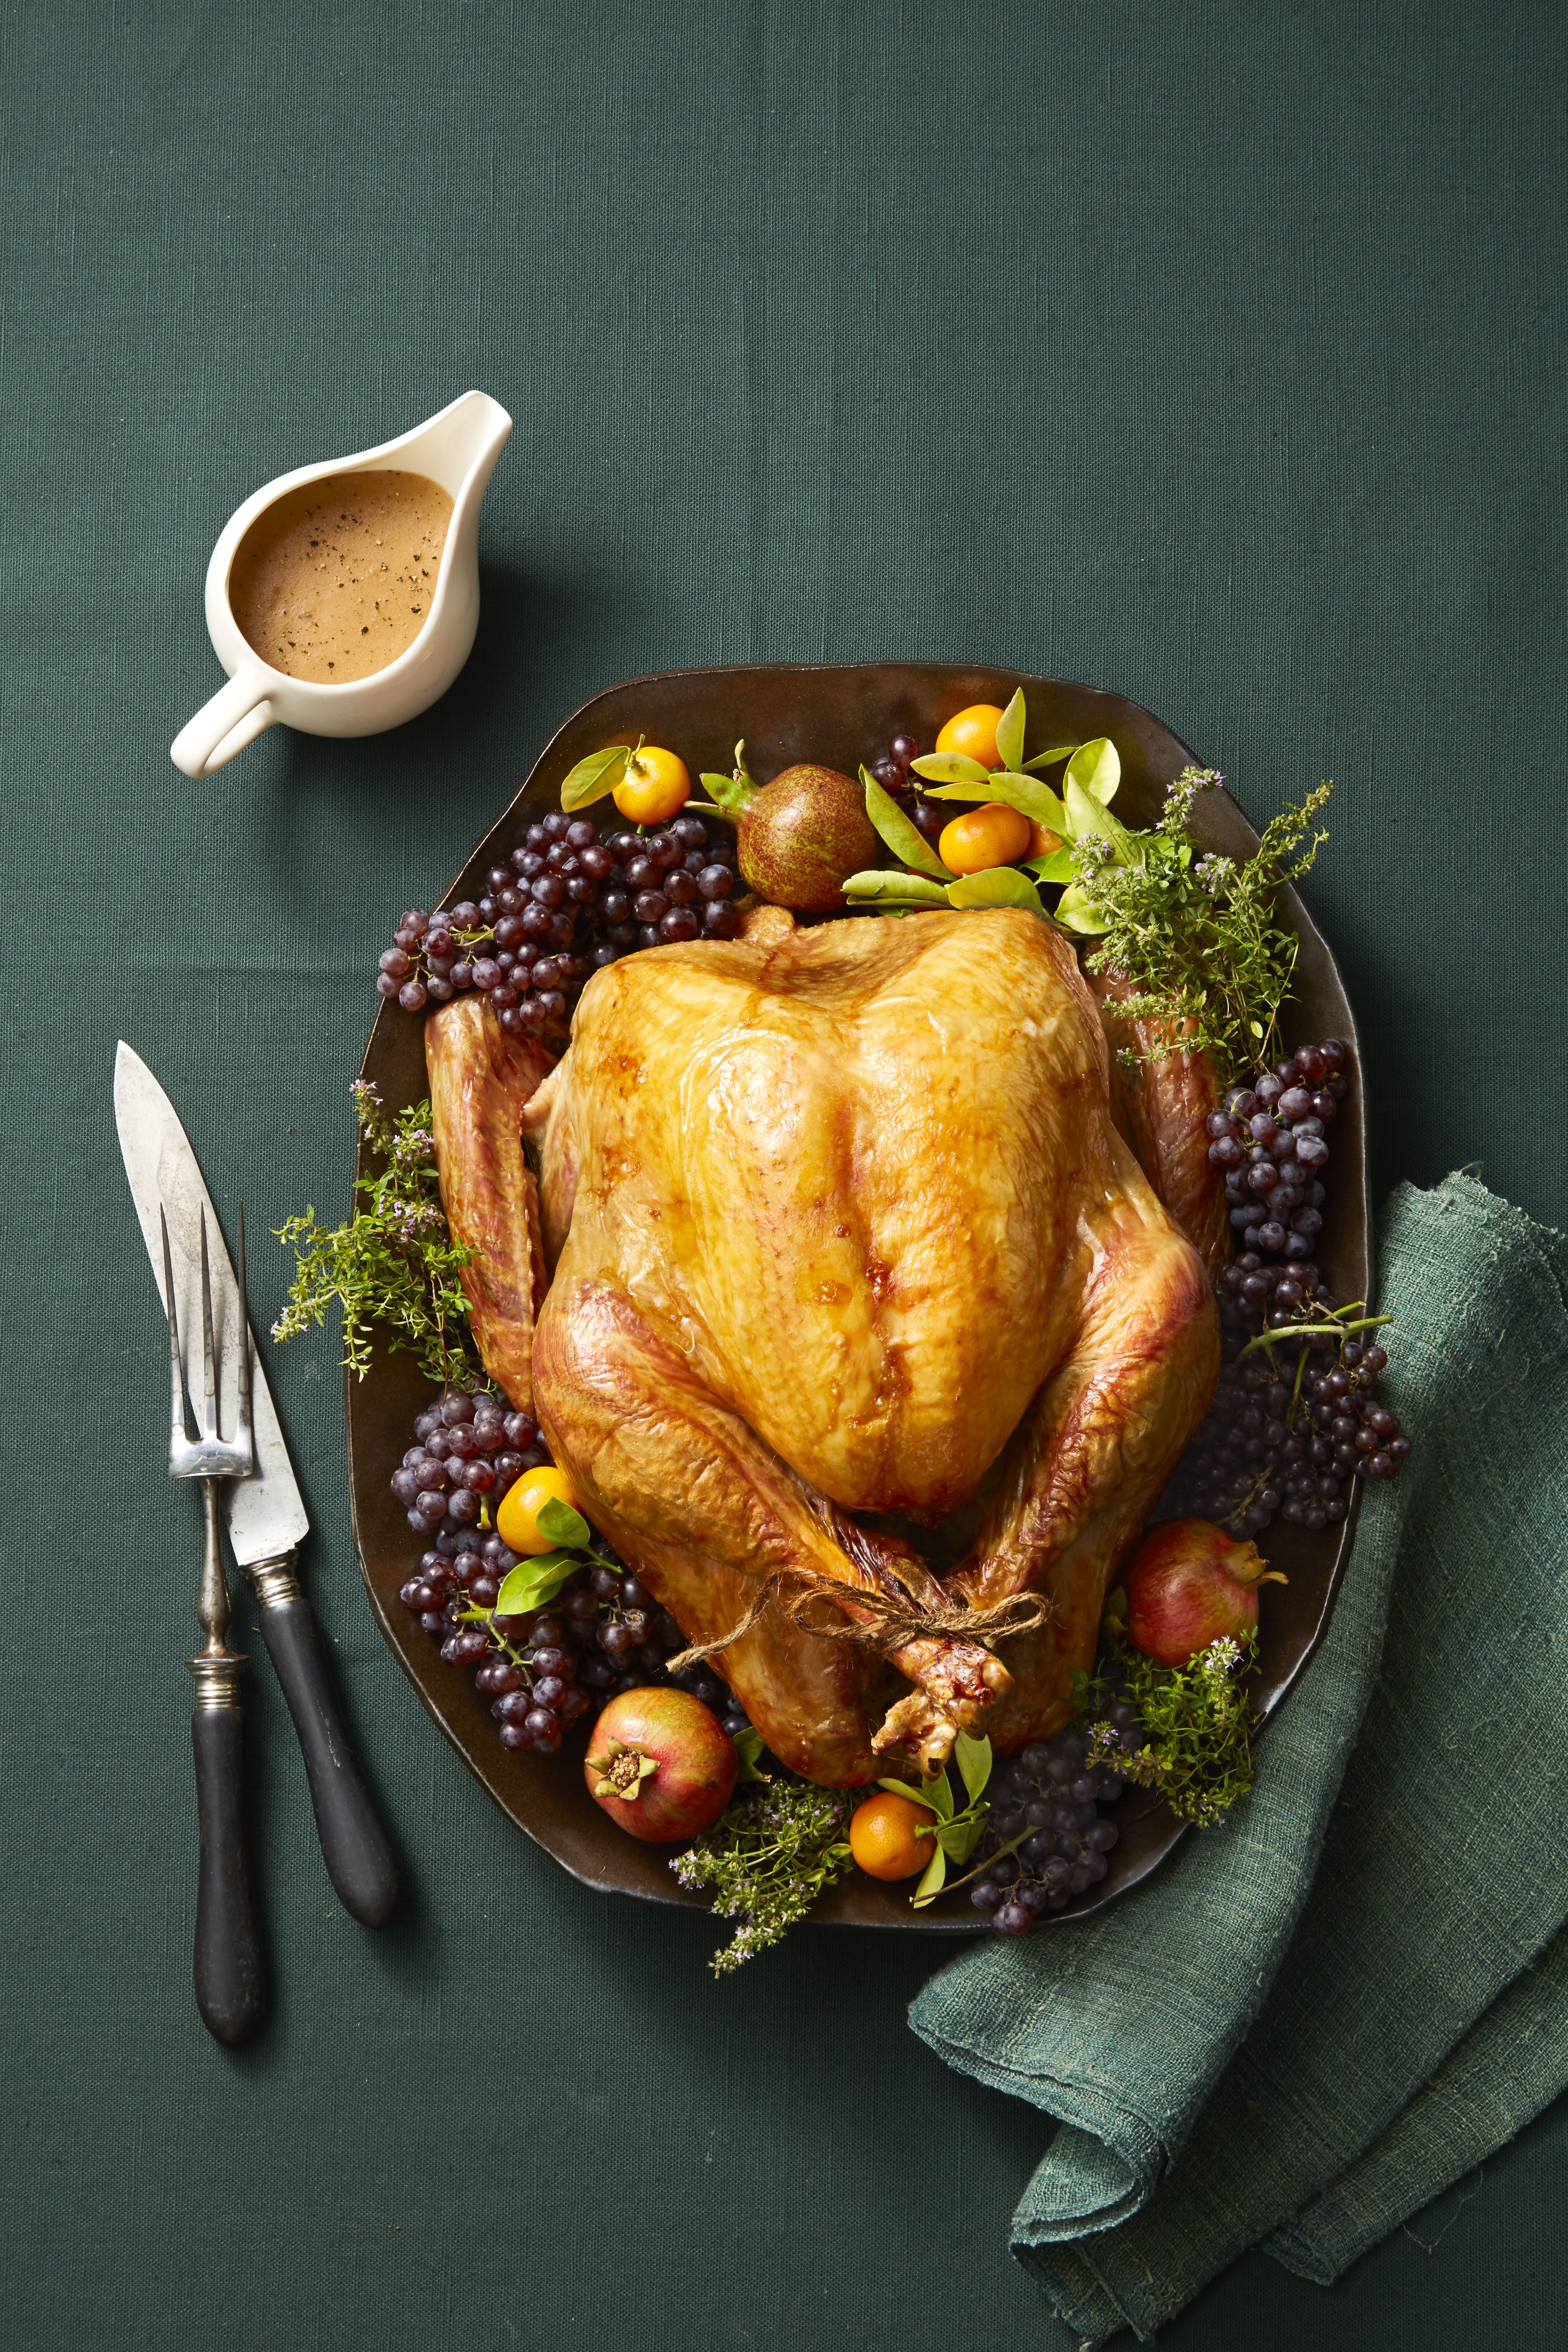 https://hips.hearstapps.com/hmg-prod/images/whole-roast-turkey-on-platter-with-garnishes-and-green-tablecoth-1599755530.jpg